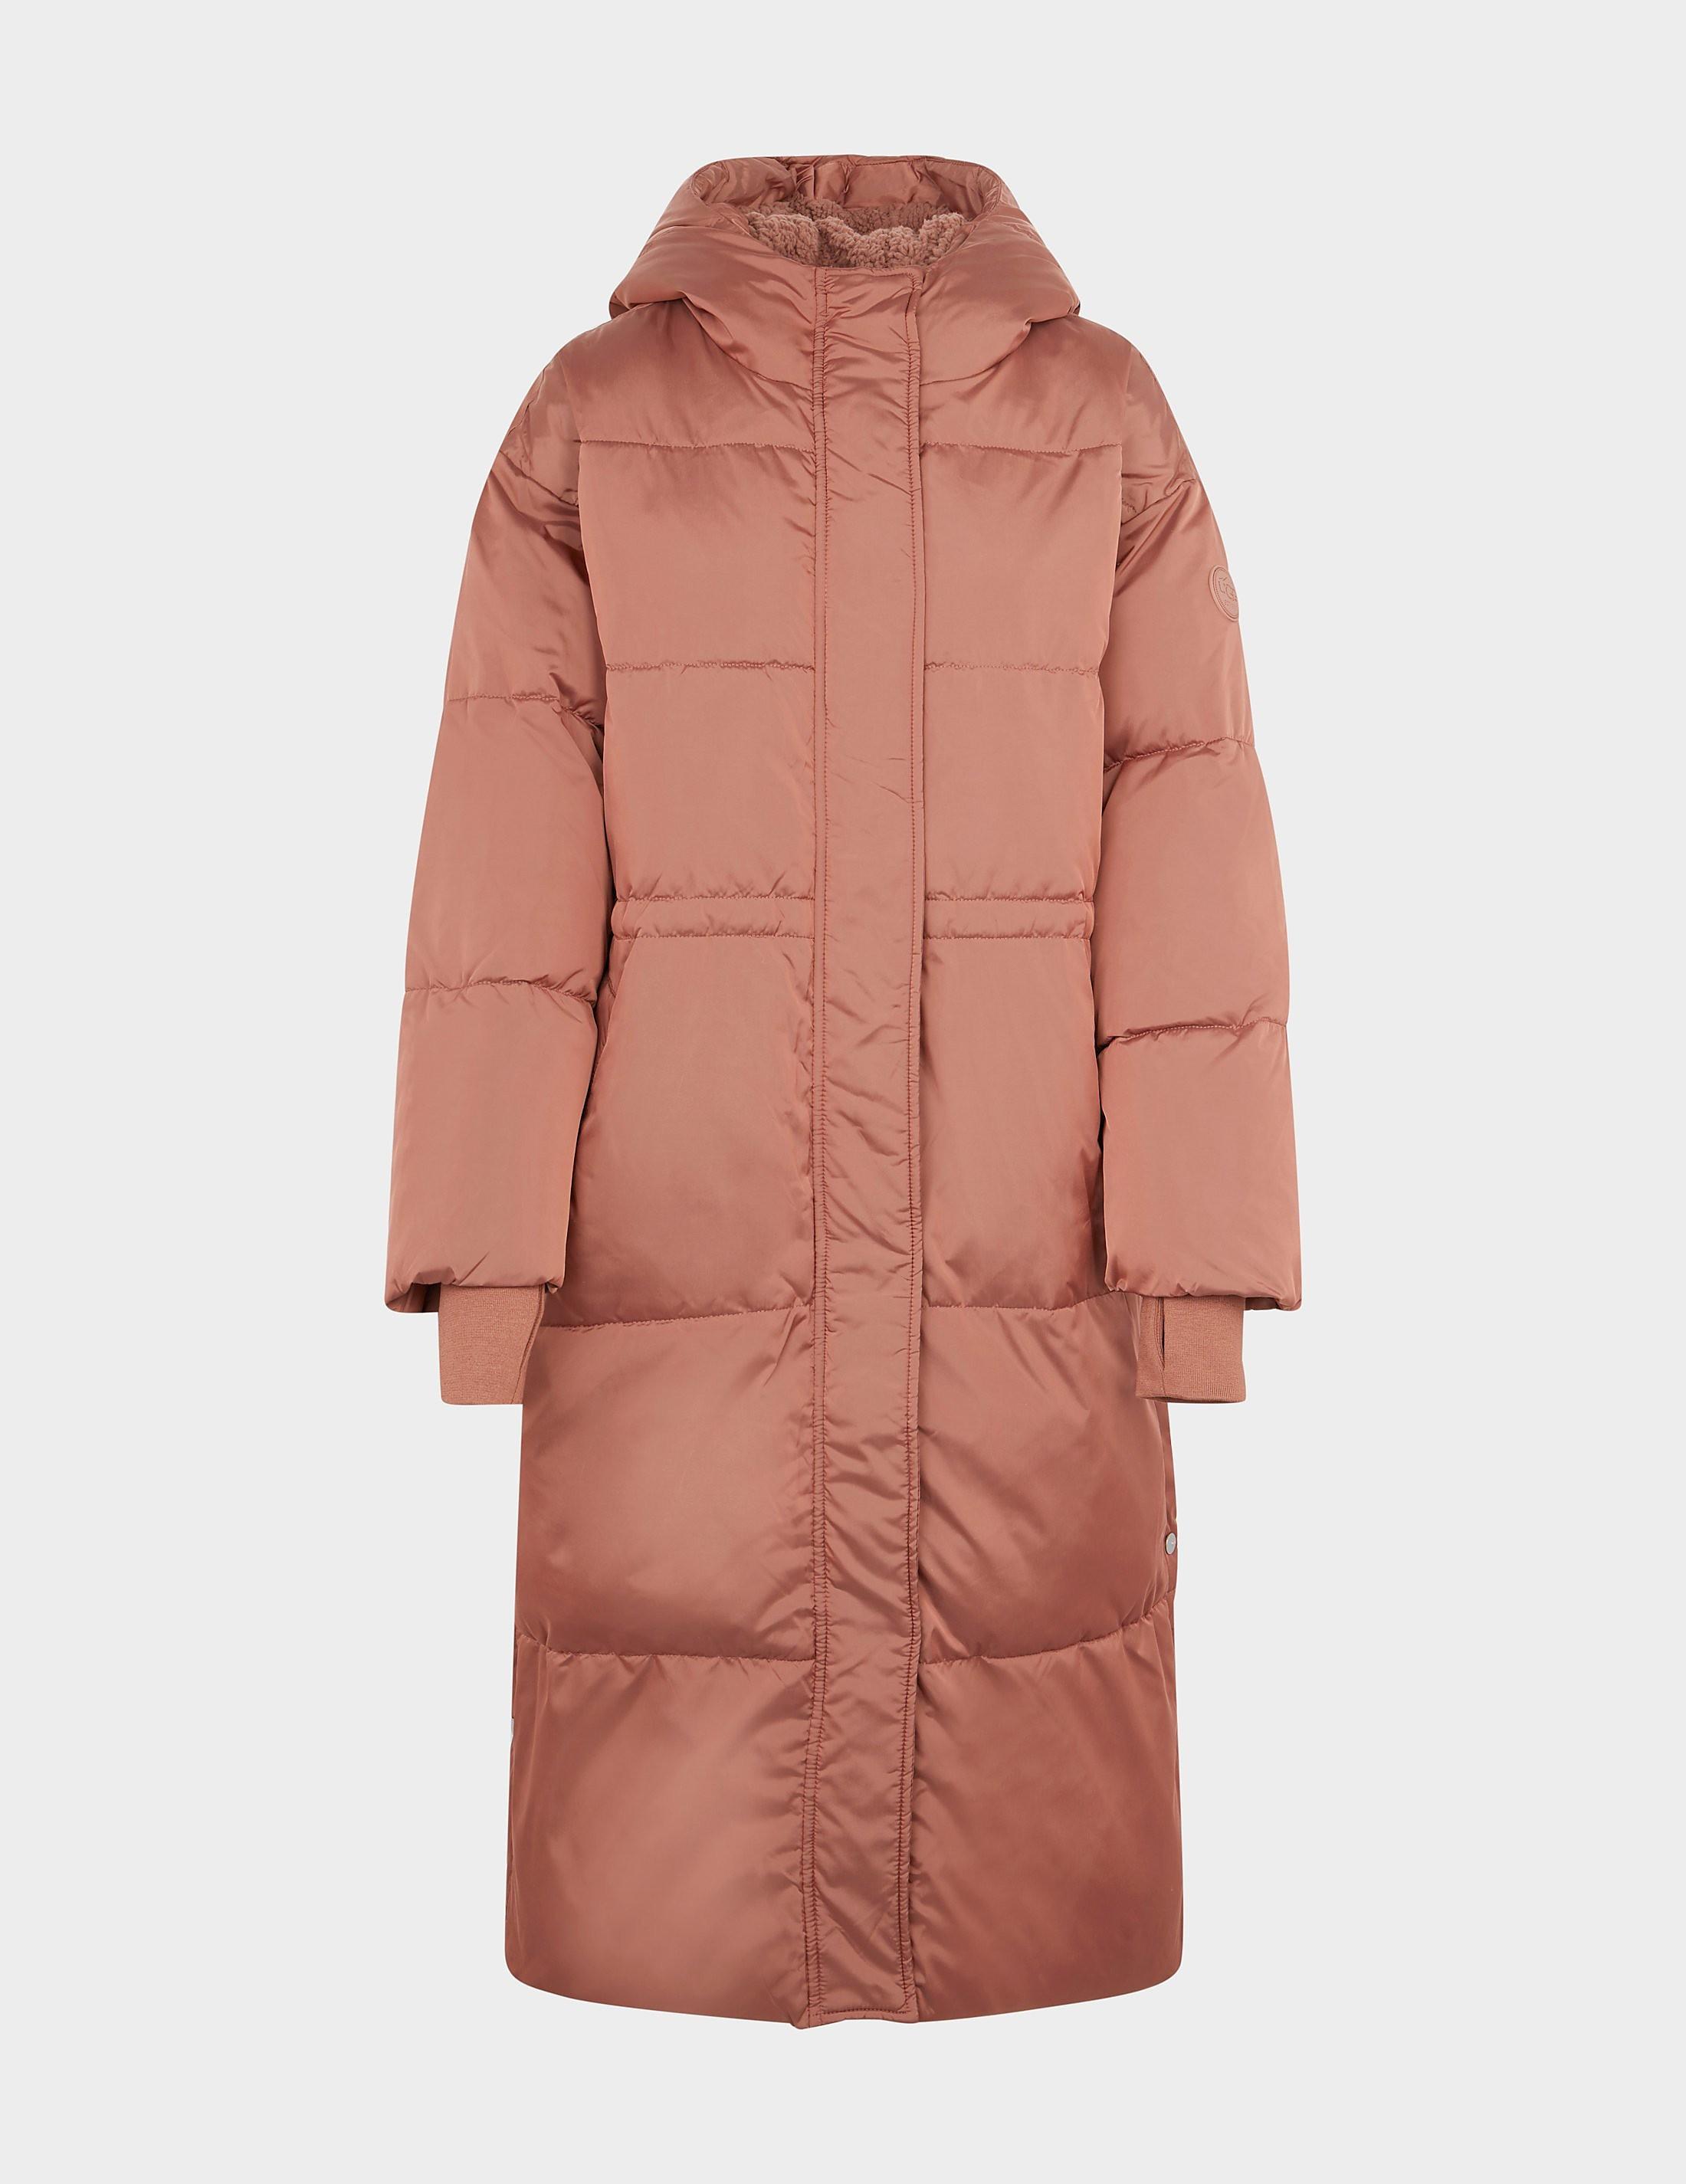 UGG Keeley Long Puffer Jacket in Pink | Lyst